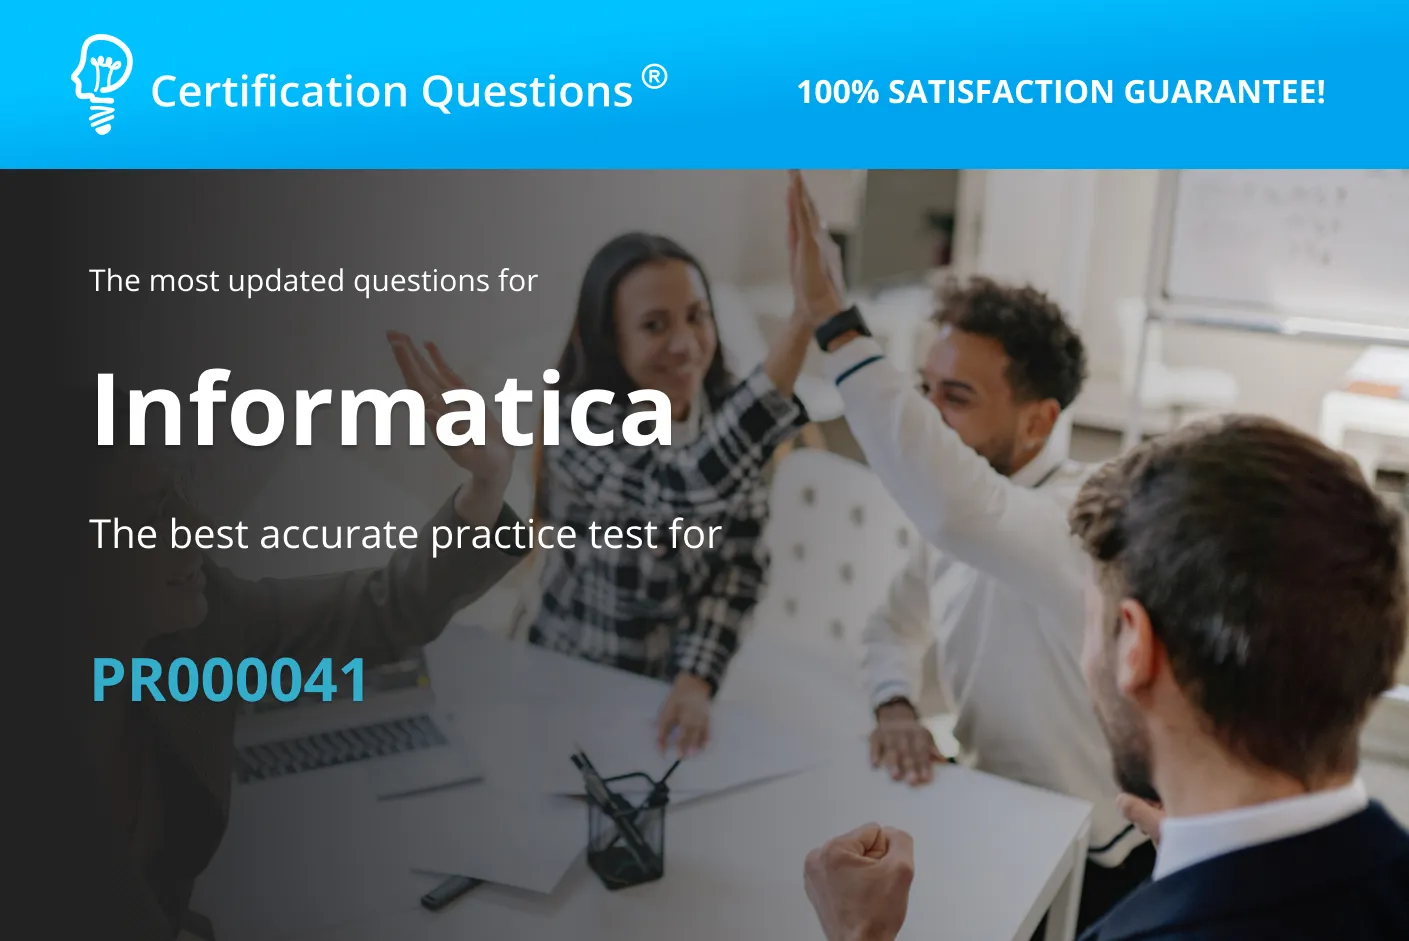 This image is related to Informatica Certification Exam Questions